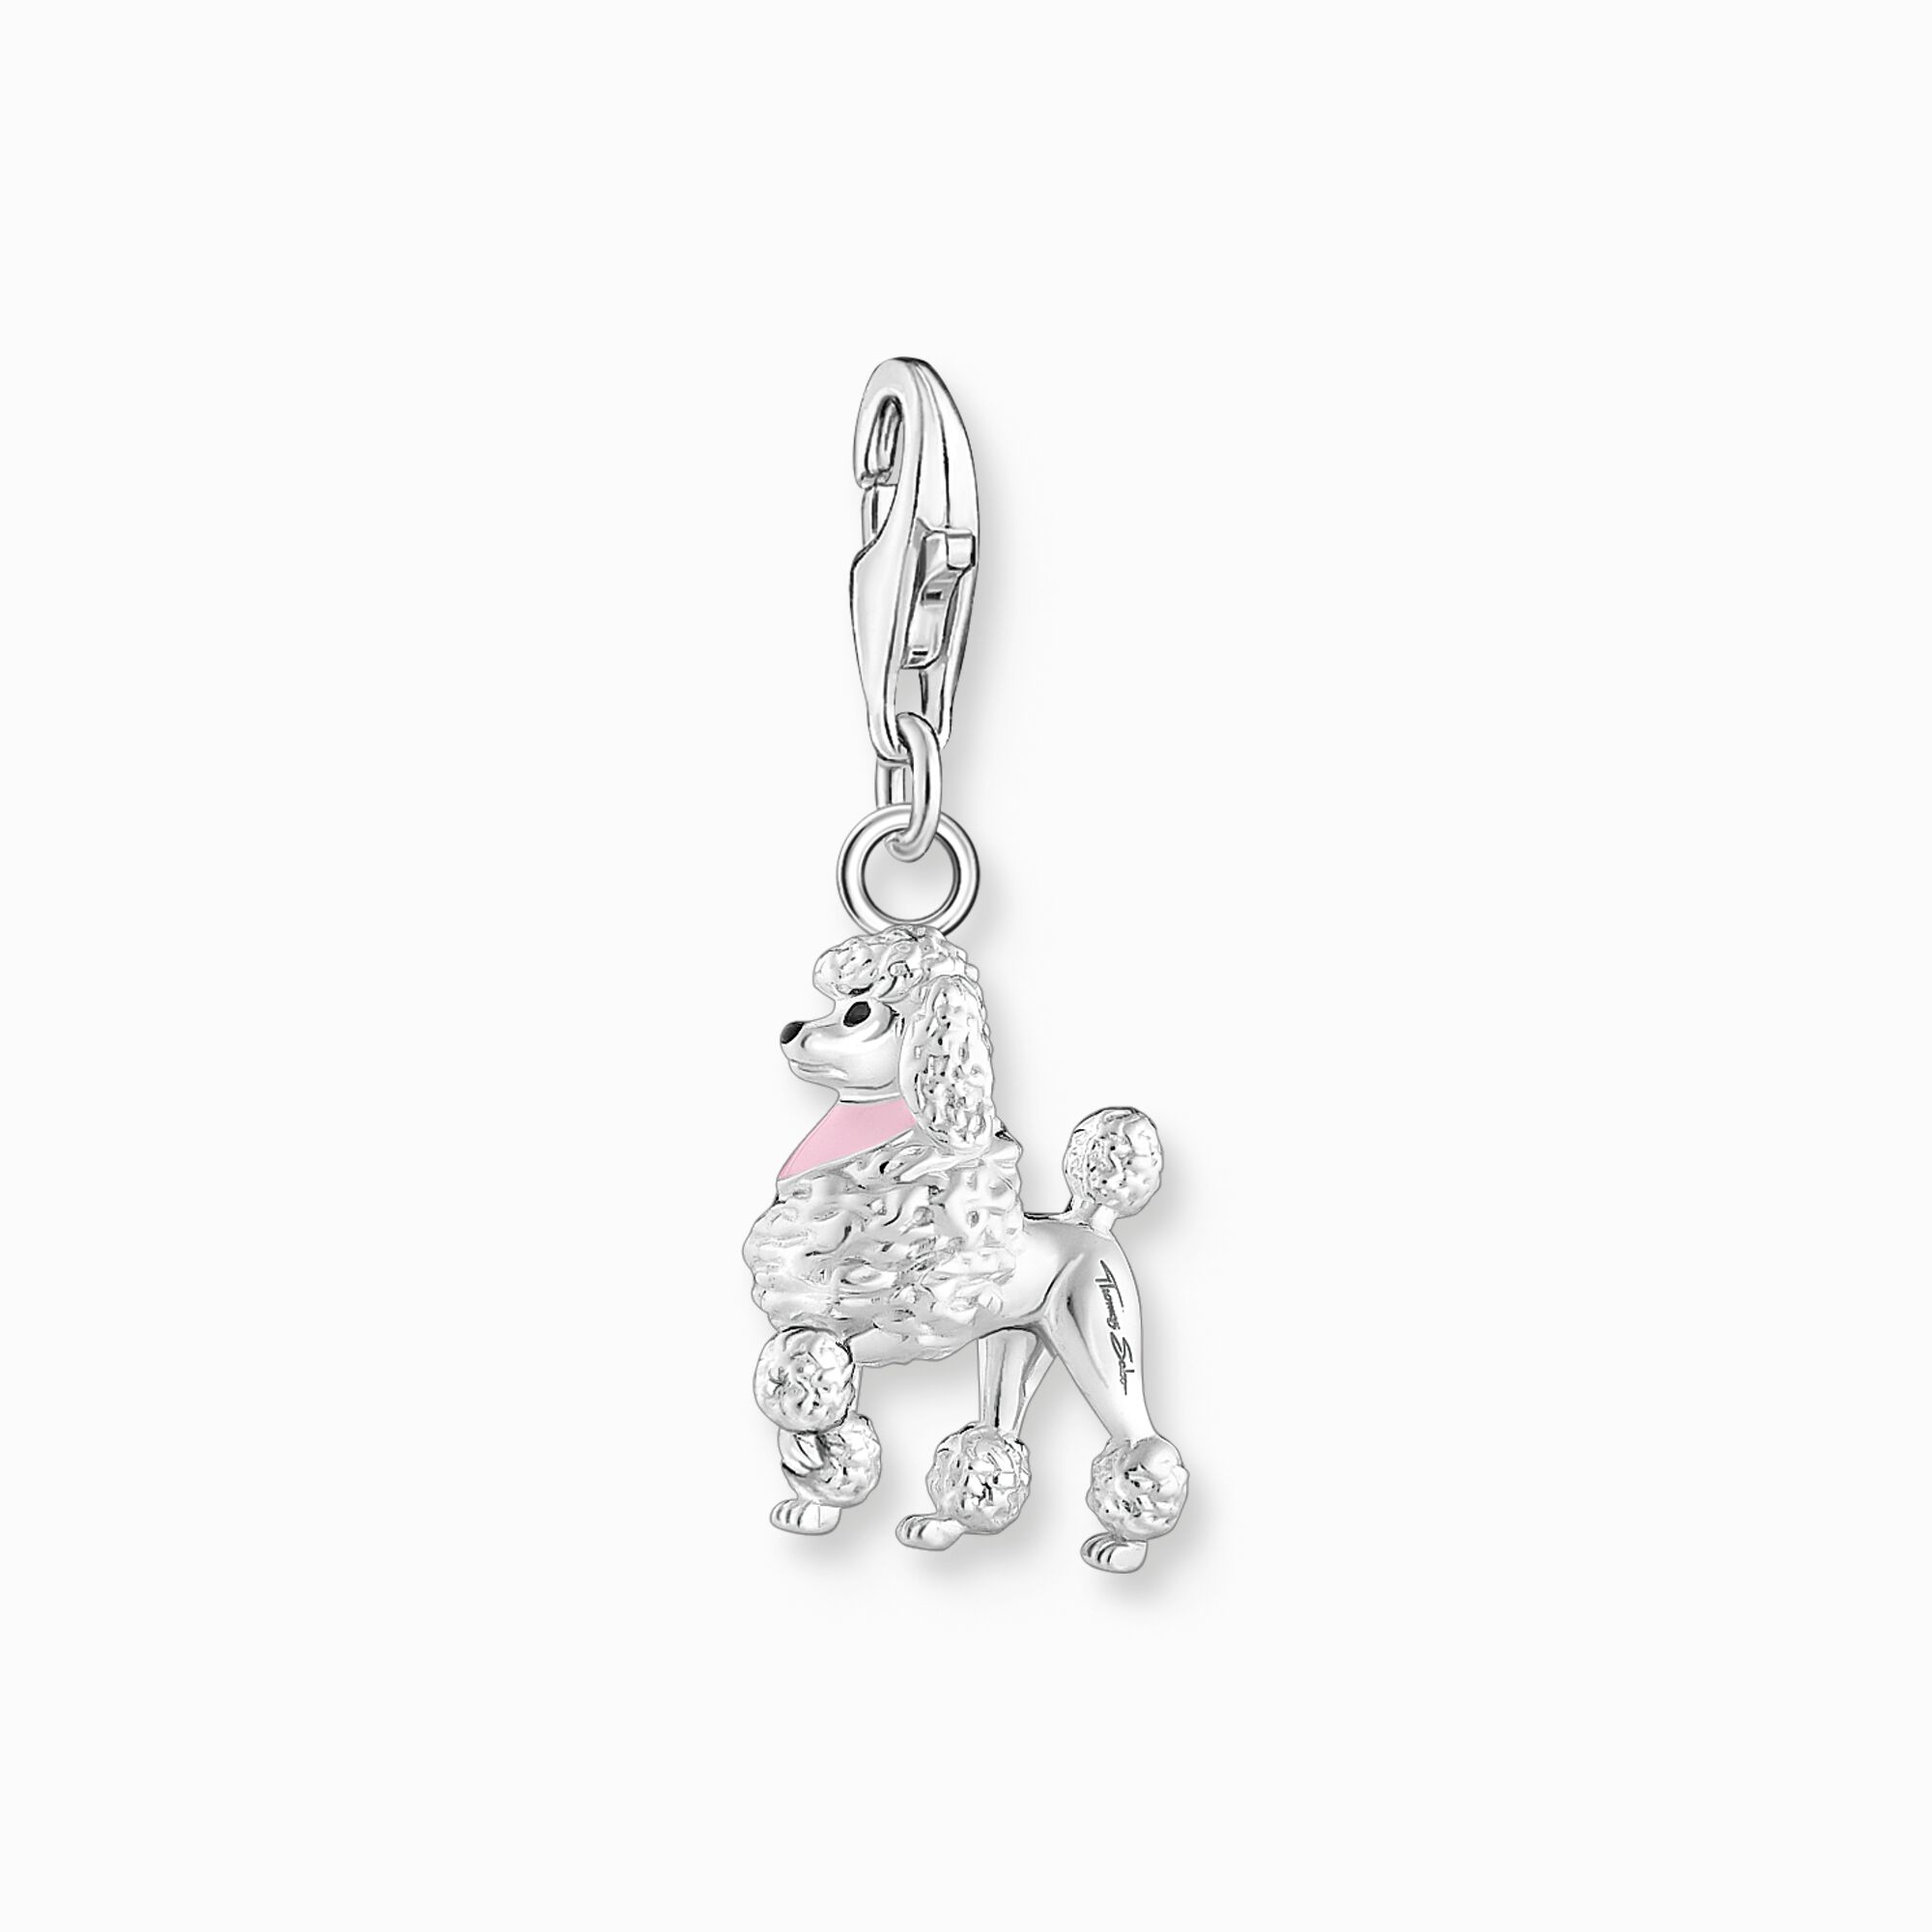 Silver member charm pendant with standard poodle with pink scarf from the Charm Club collection in the THOMAS SABO online store